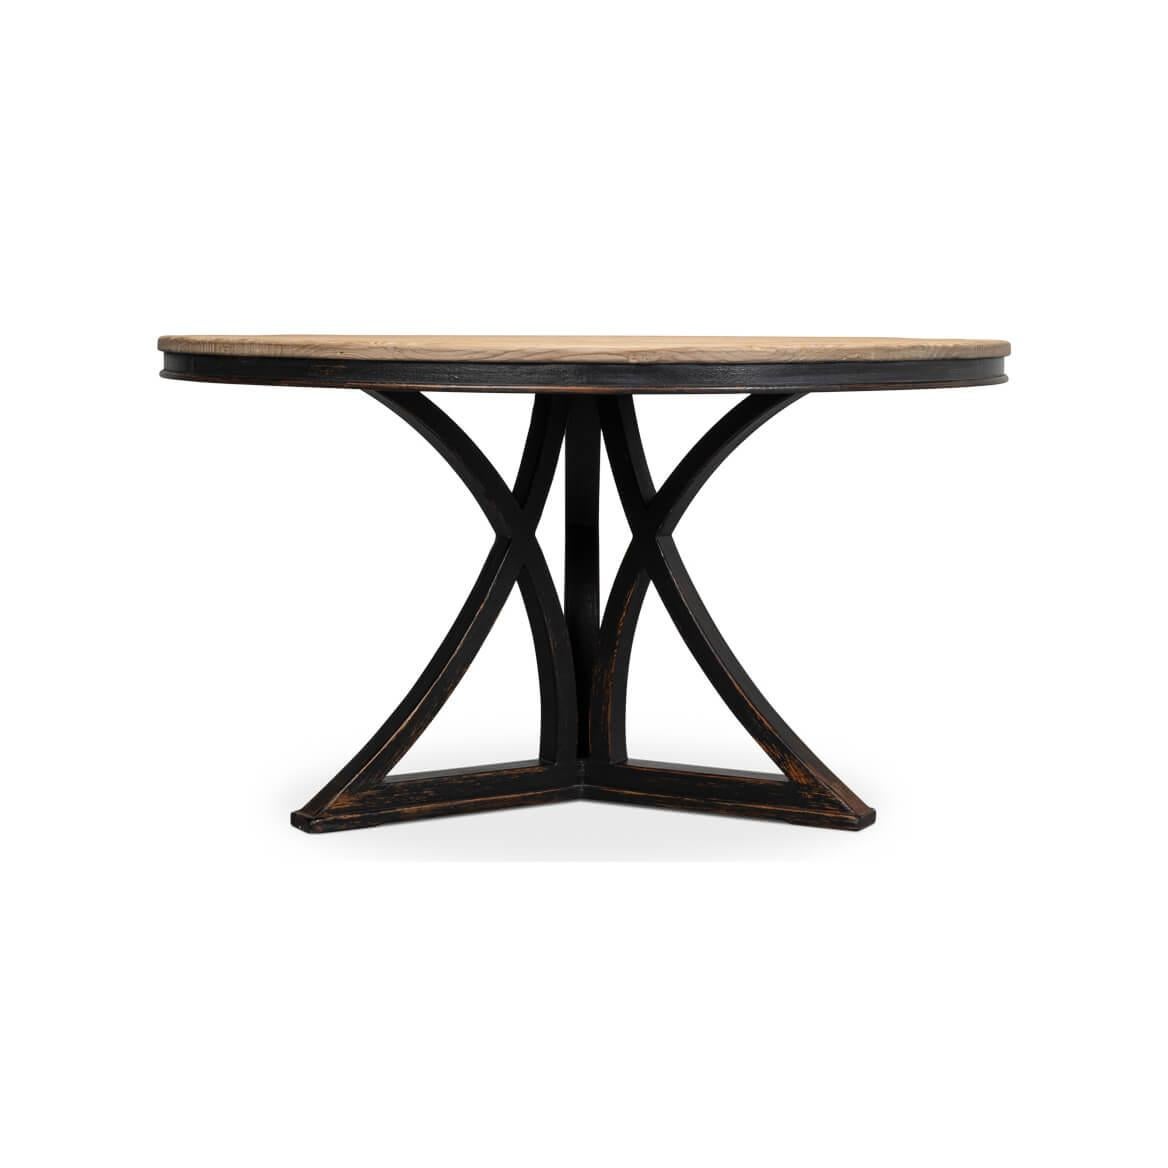 Wood Modern Rustic Round Dining Table - Black For Sale